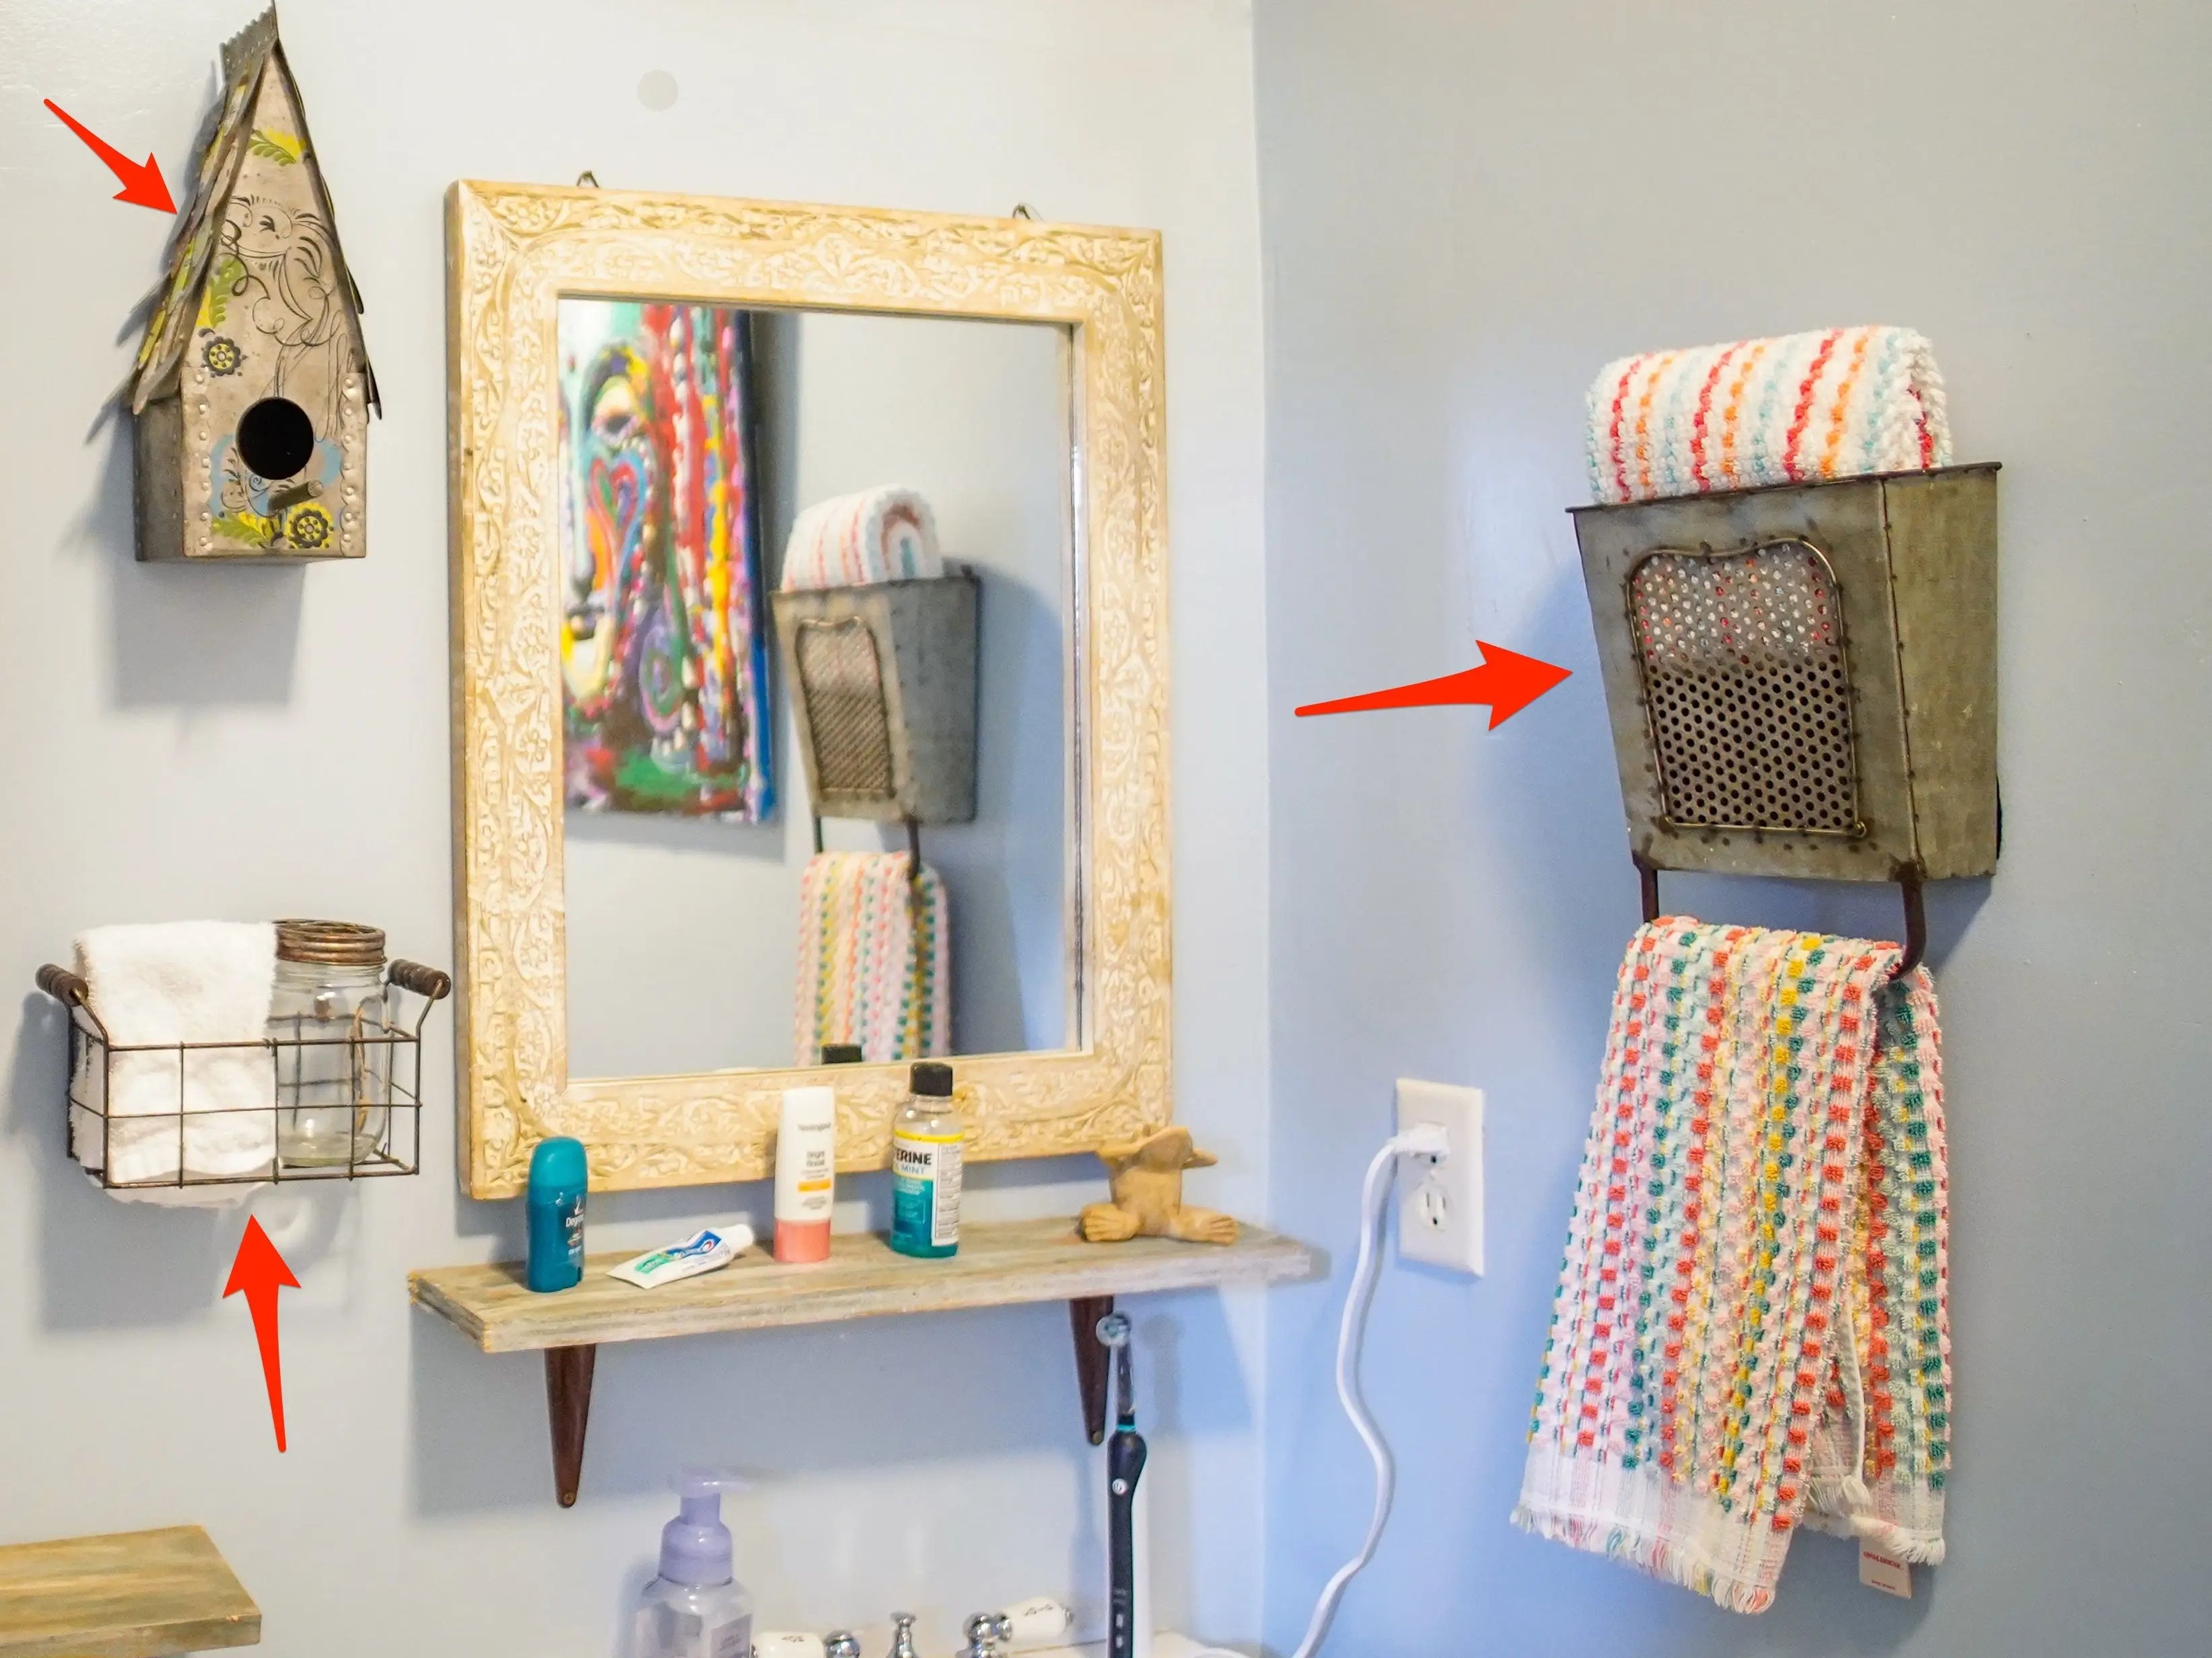 Arrows point to space saving hacks in the tiny home